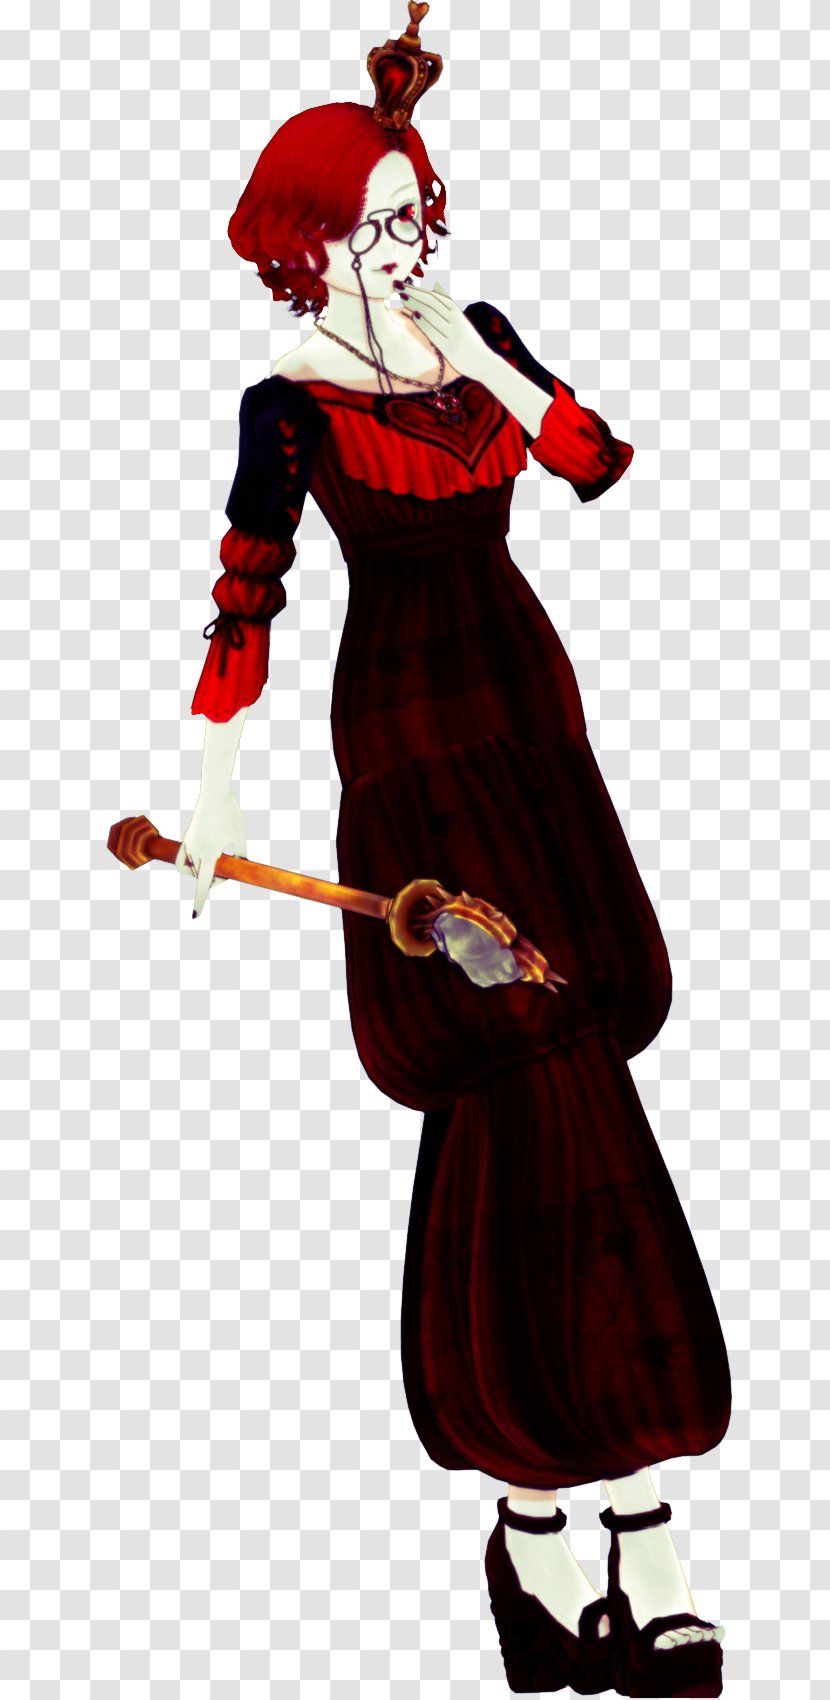 Costume Design Character Fiction - QUEEN OF HEART Transparent PNG